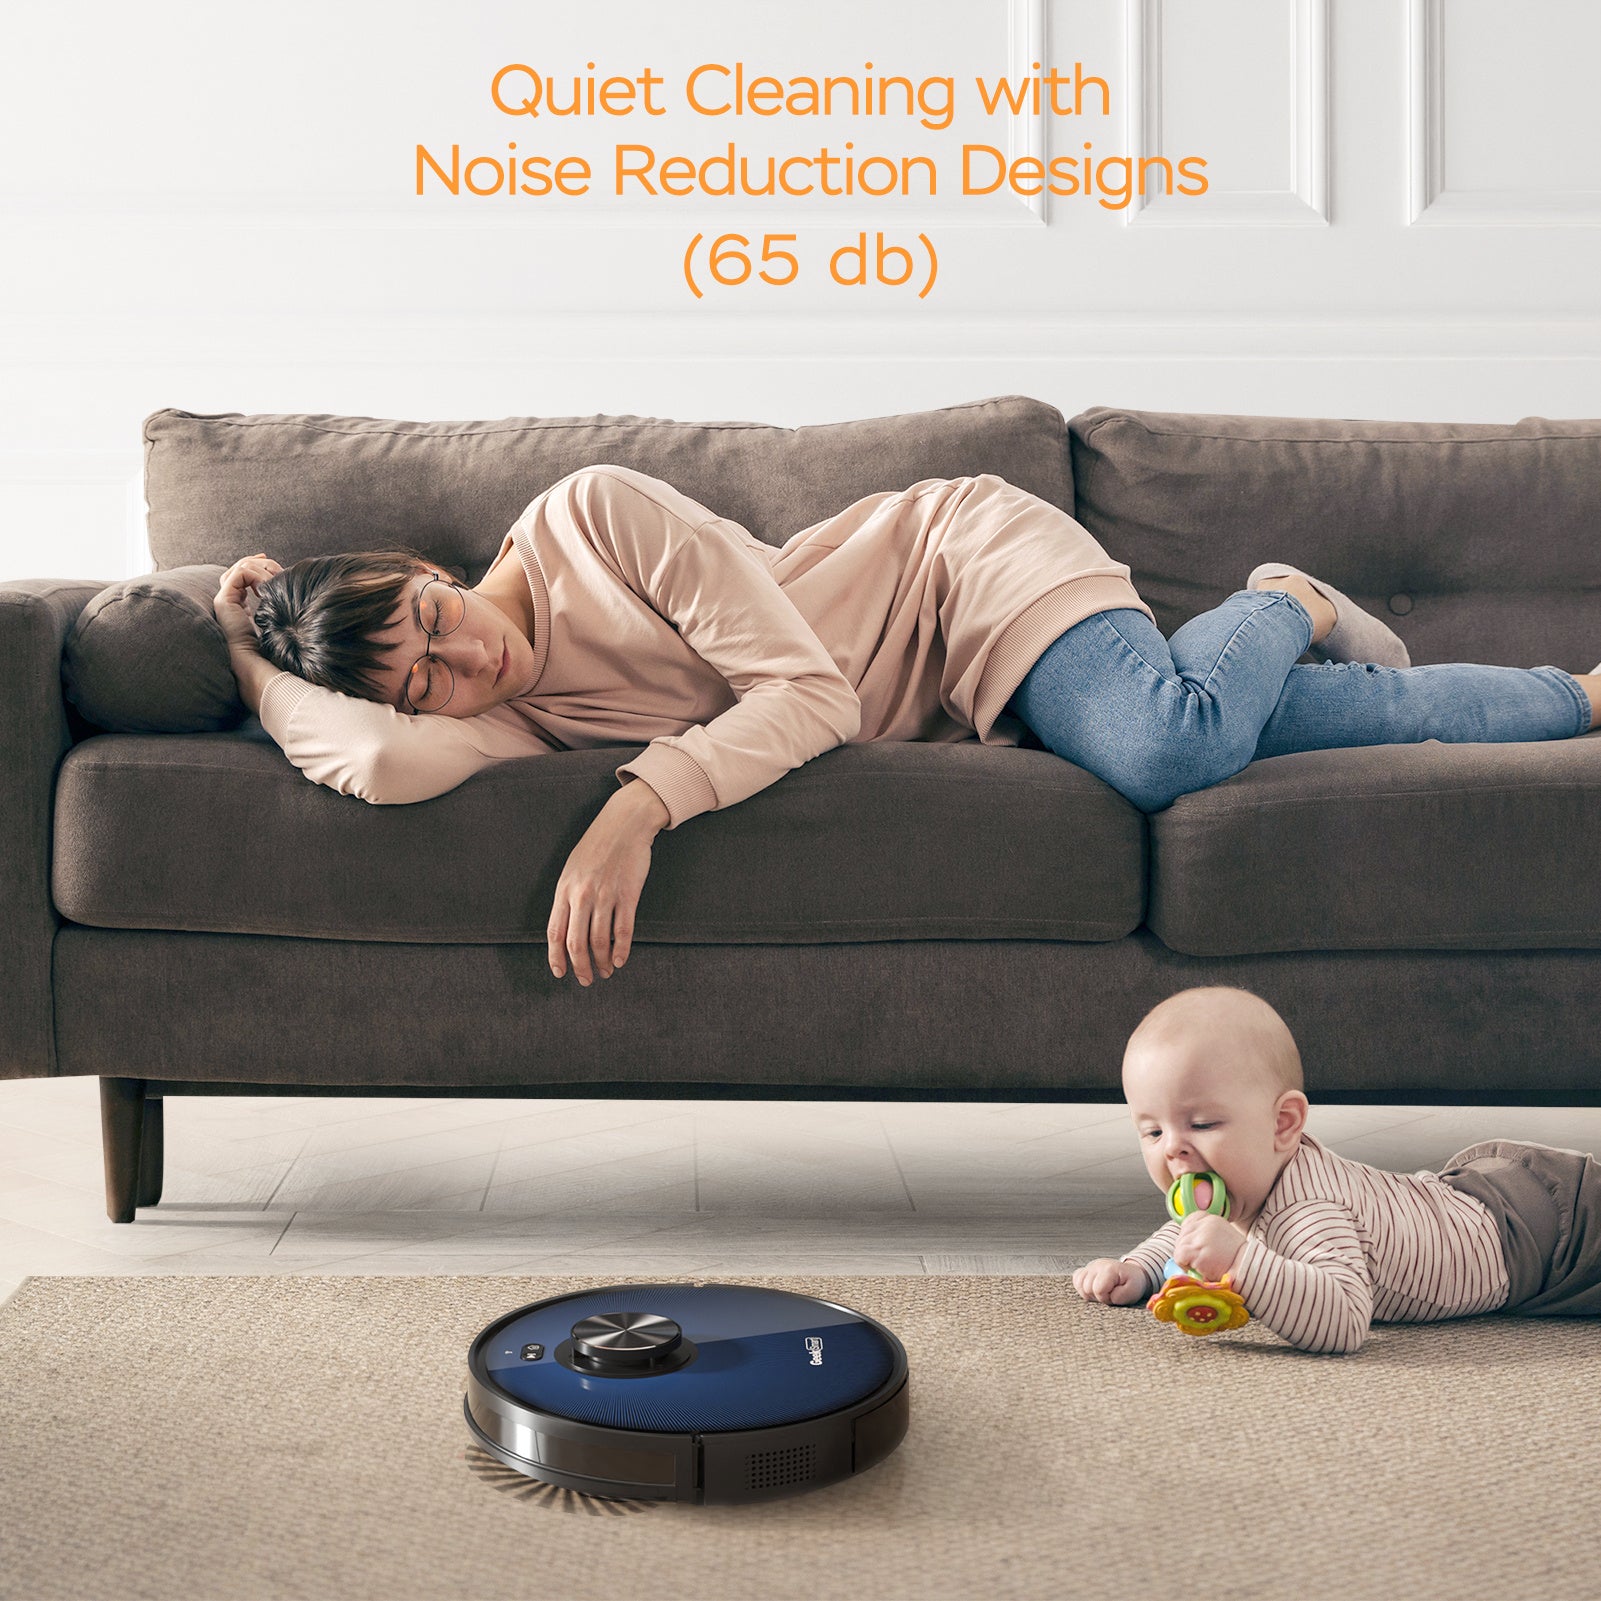 Geek Smart L7 Robot Vacuum Cleaner And Mop, LDS Navigation, Wi-Fi Connected APP, Selective Room Cleaning,MAX 2700 PA Suction, Ideal For Pets And Larger Home Banned From Selling On Amazon